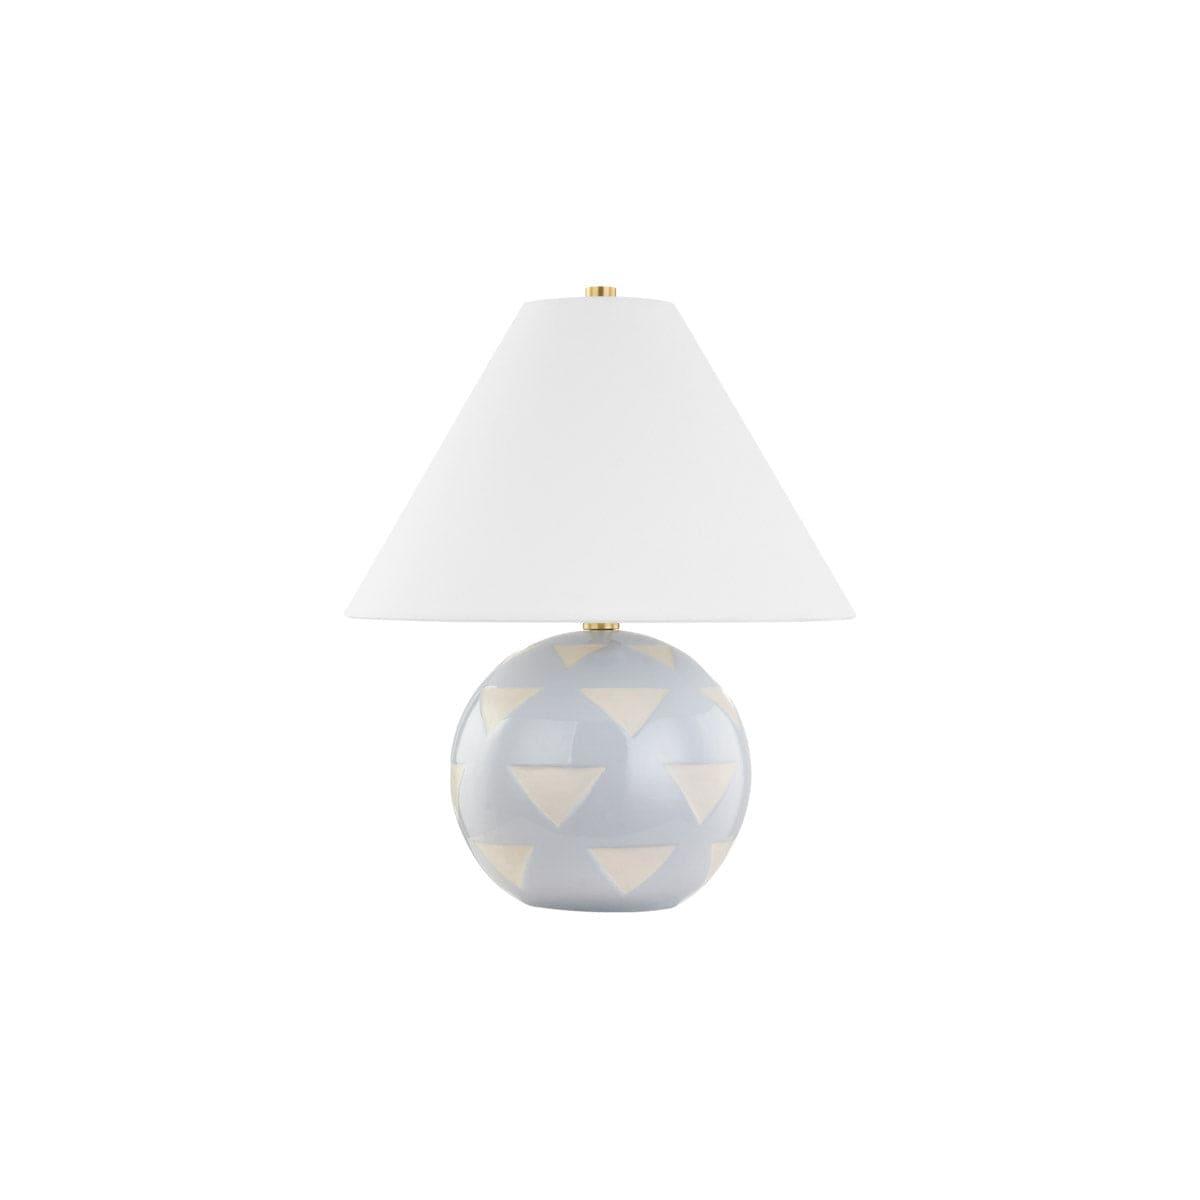 Mitzi - Minnie Round Table Lamp - HL714201B-AGB/CBO | Montreal Lighting & Hardware